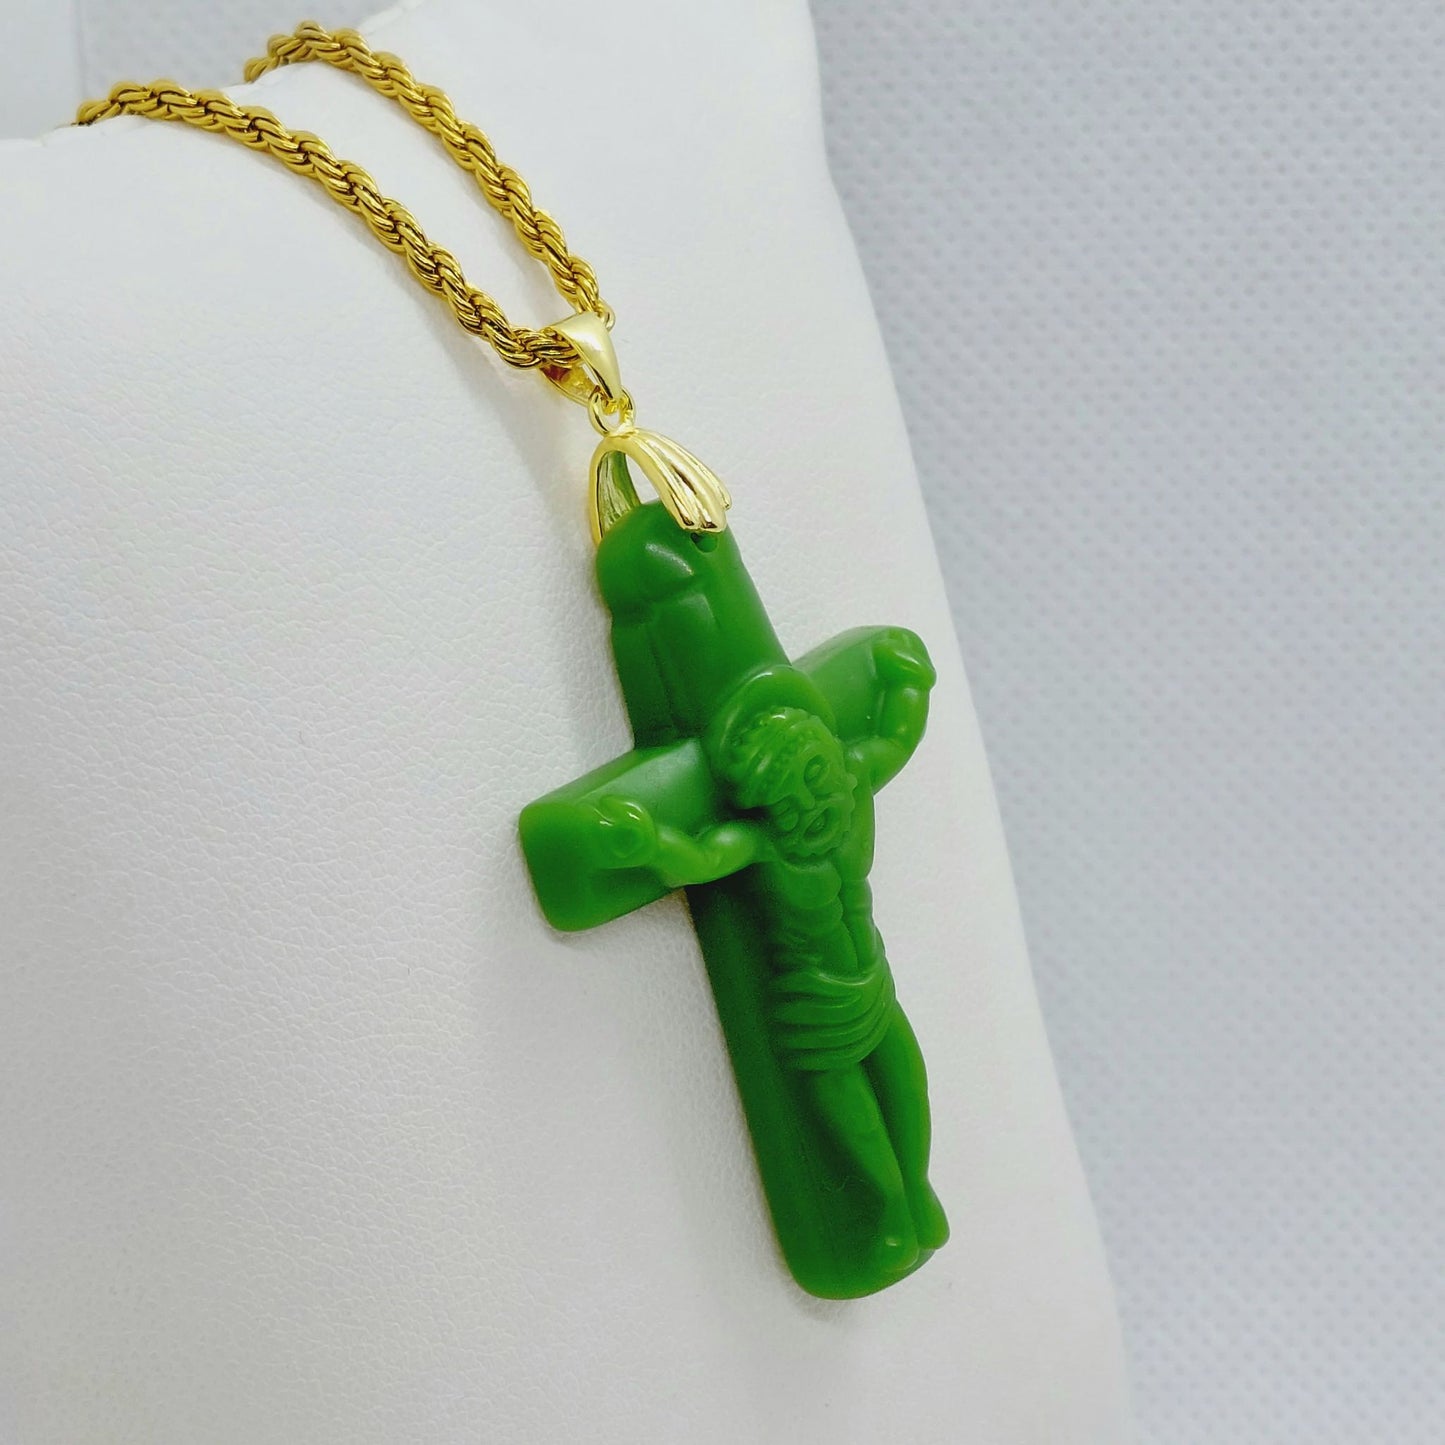 Natural Chinese Jade Cross Pendant - Stainless Steel Chain Necklace